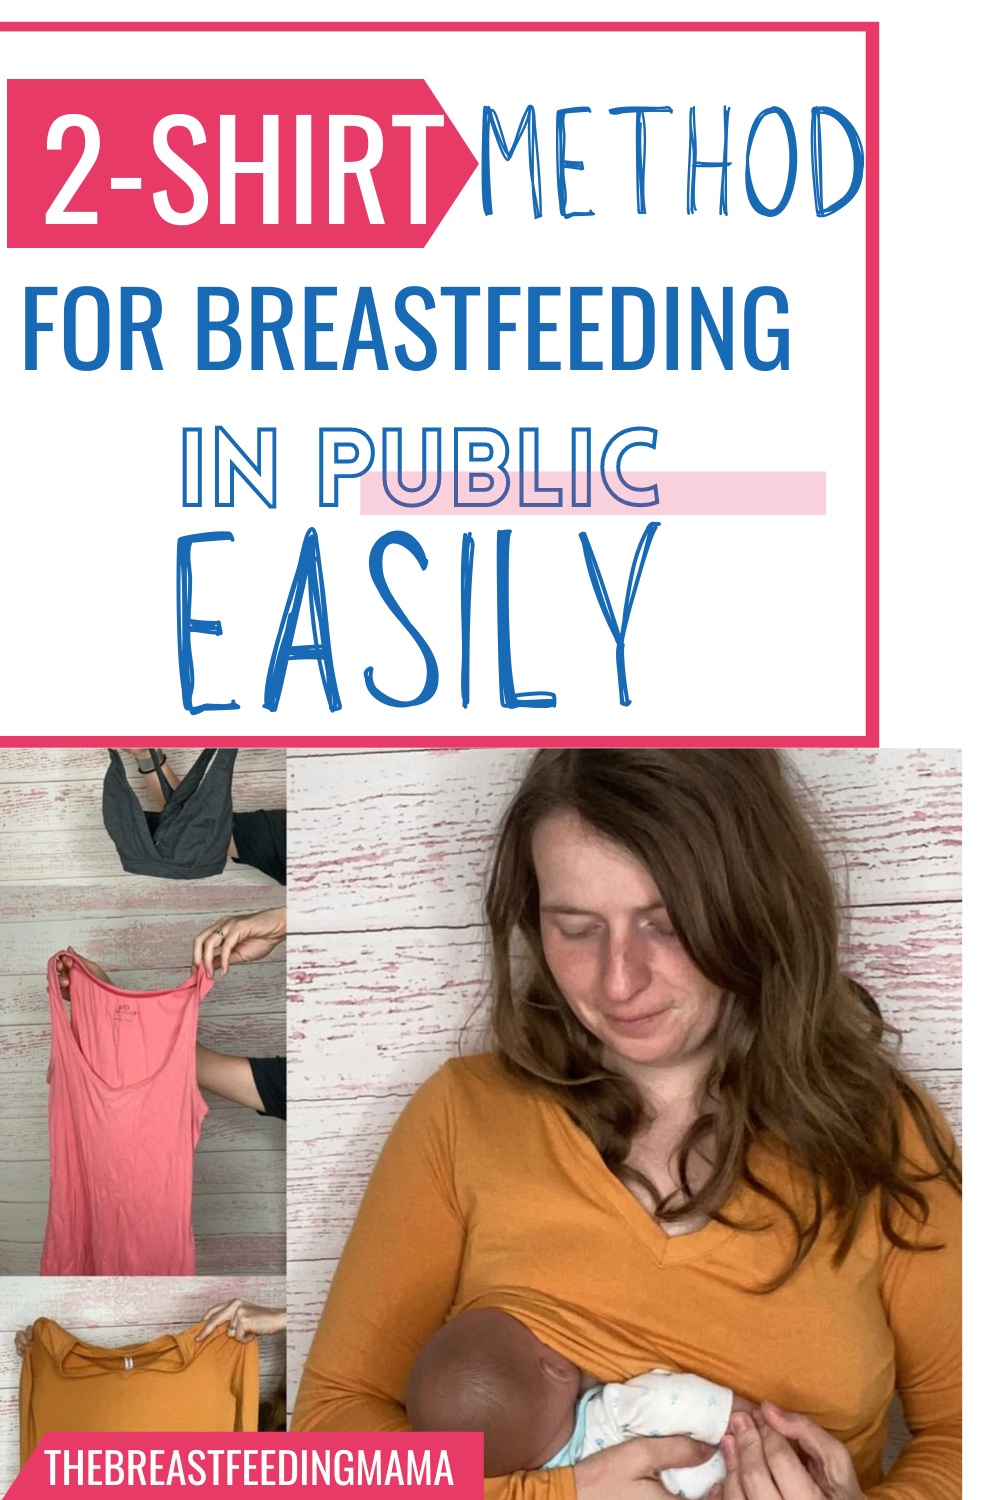 Do you feel self-conscious about nursing in public? You're not alone. Here's a two-shirt method that makes it easy to breastfeed discreetly in any situation. Nursing your baby is an important bonding experience, and this trick will make it a little easier for you. Enjoy!